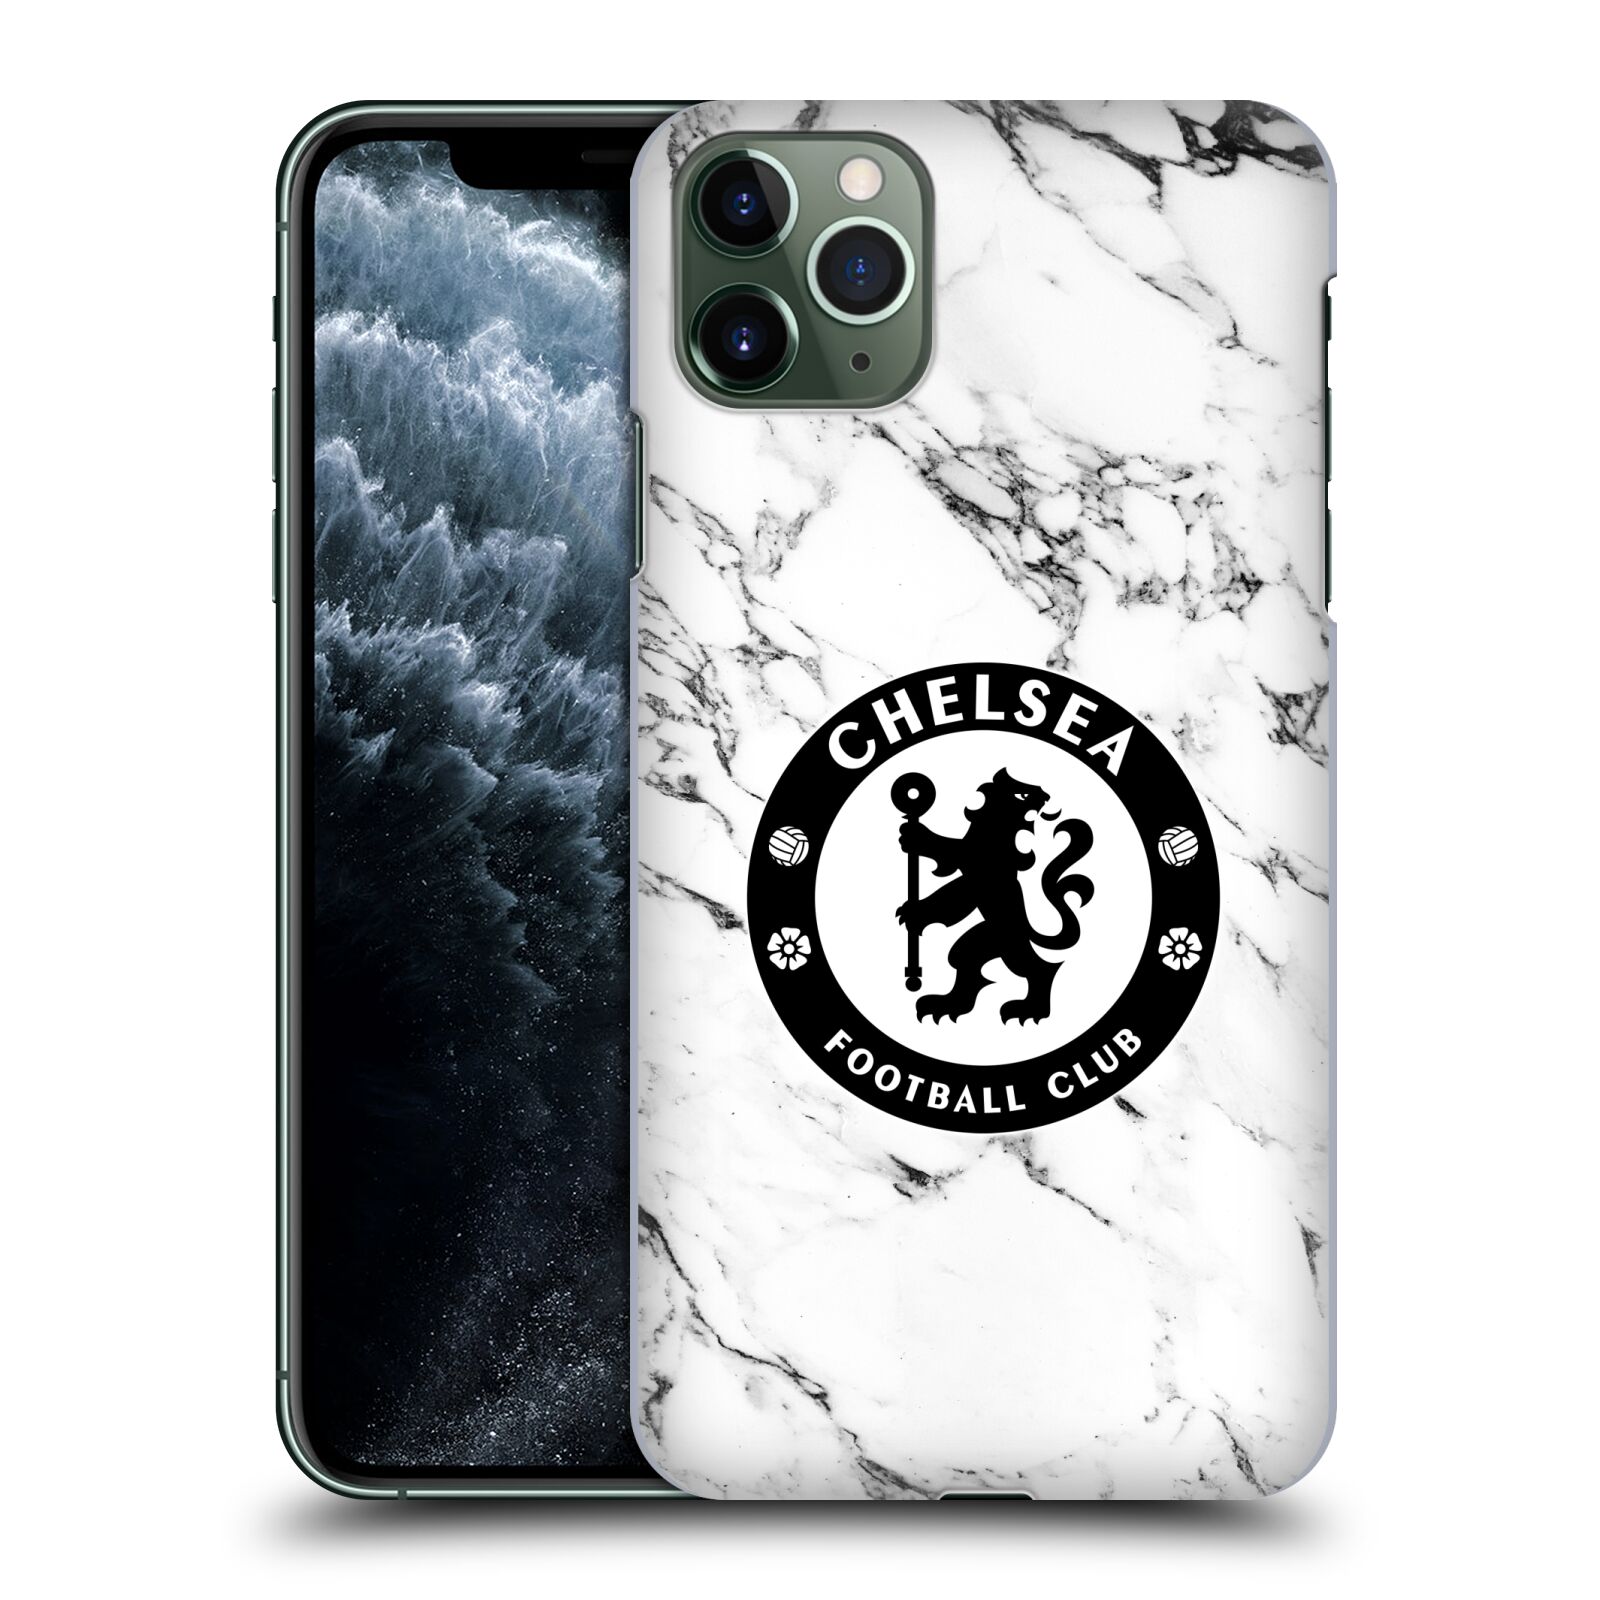 SE 2020 & 2022 Head Case Designs Officially Licensed Chelsea Football Club Super Graphic Crest Leather Book Flip Case Cover Compatible With Apple iPhone 7/8